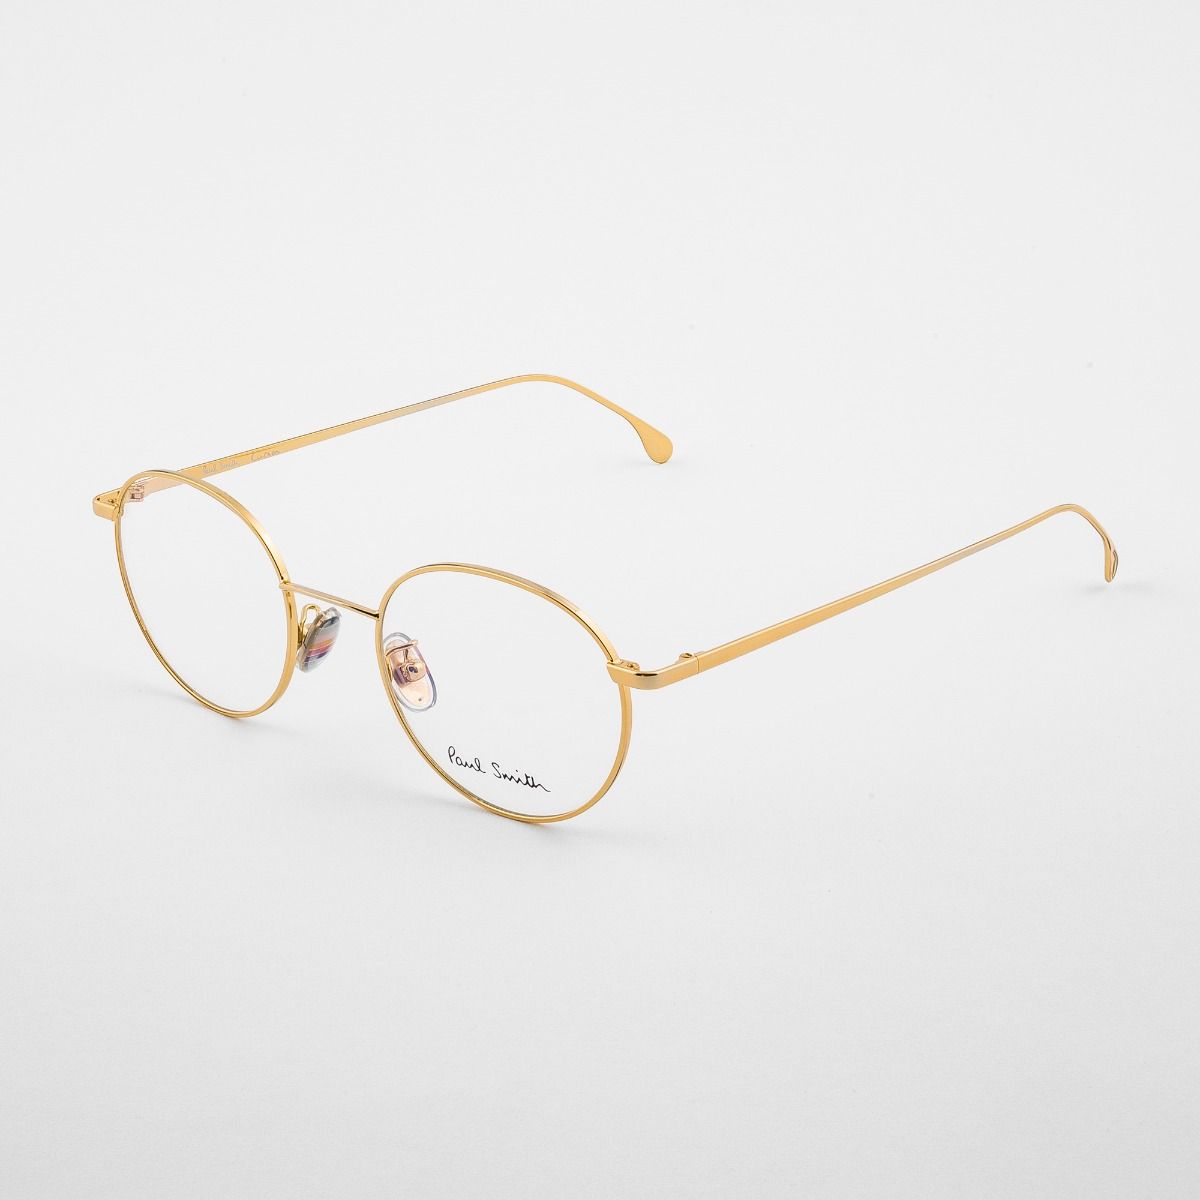 Paul Smith Curzon Optical Round Glasses